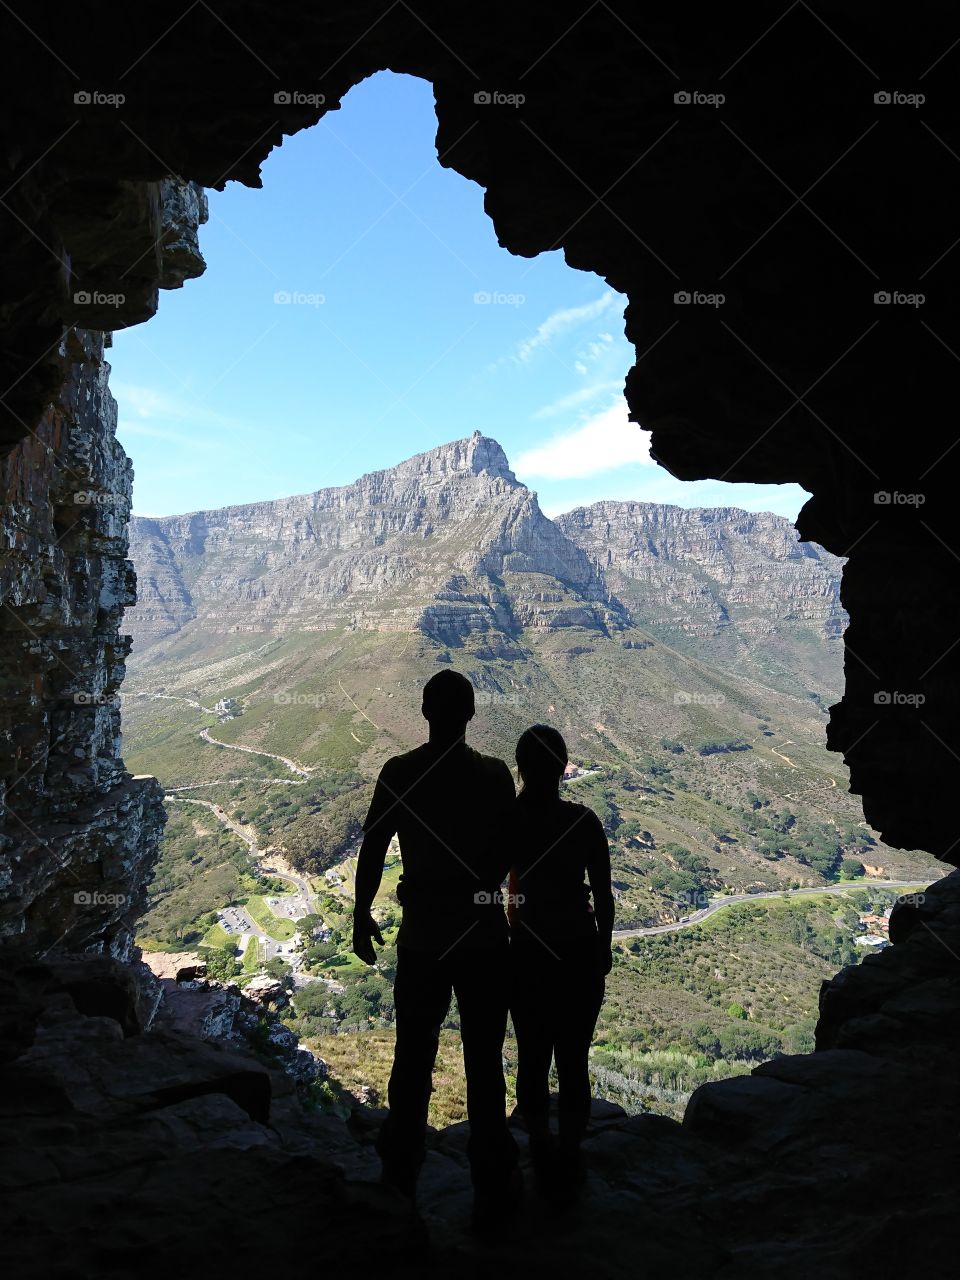 Wally's Cave - South Africa